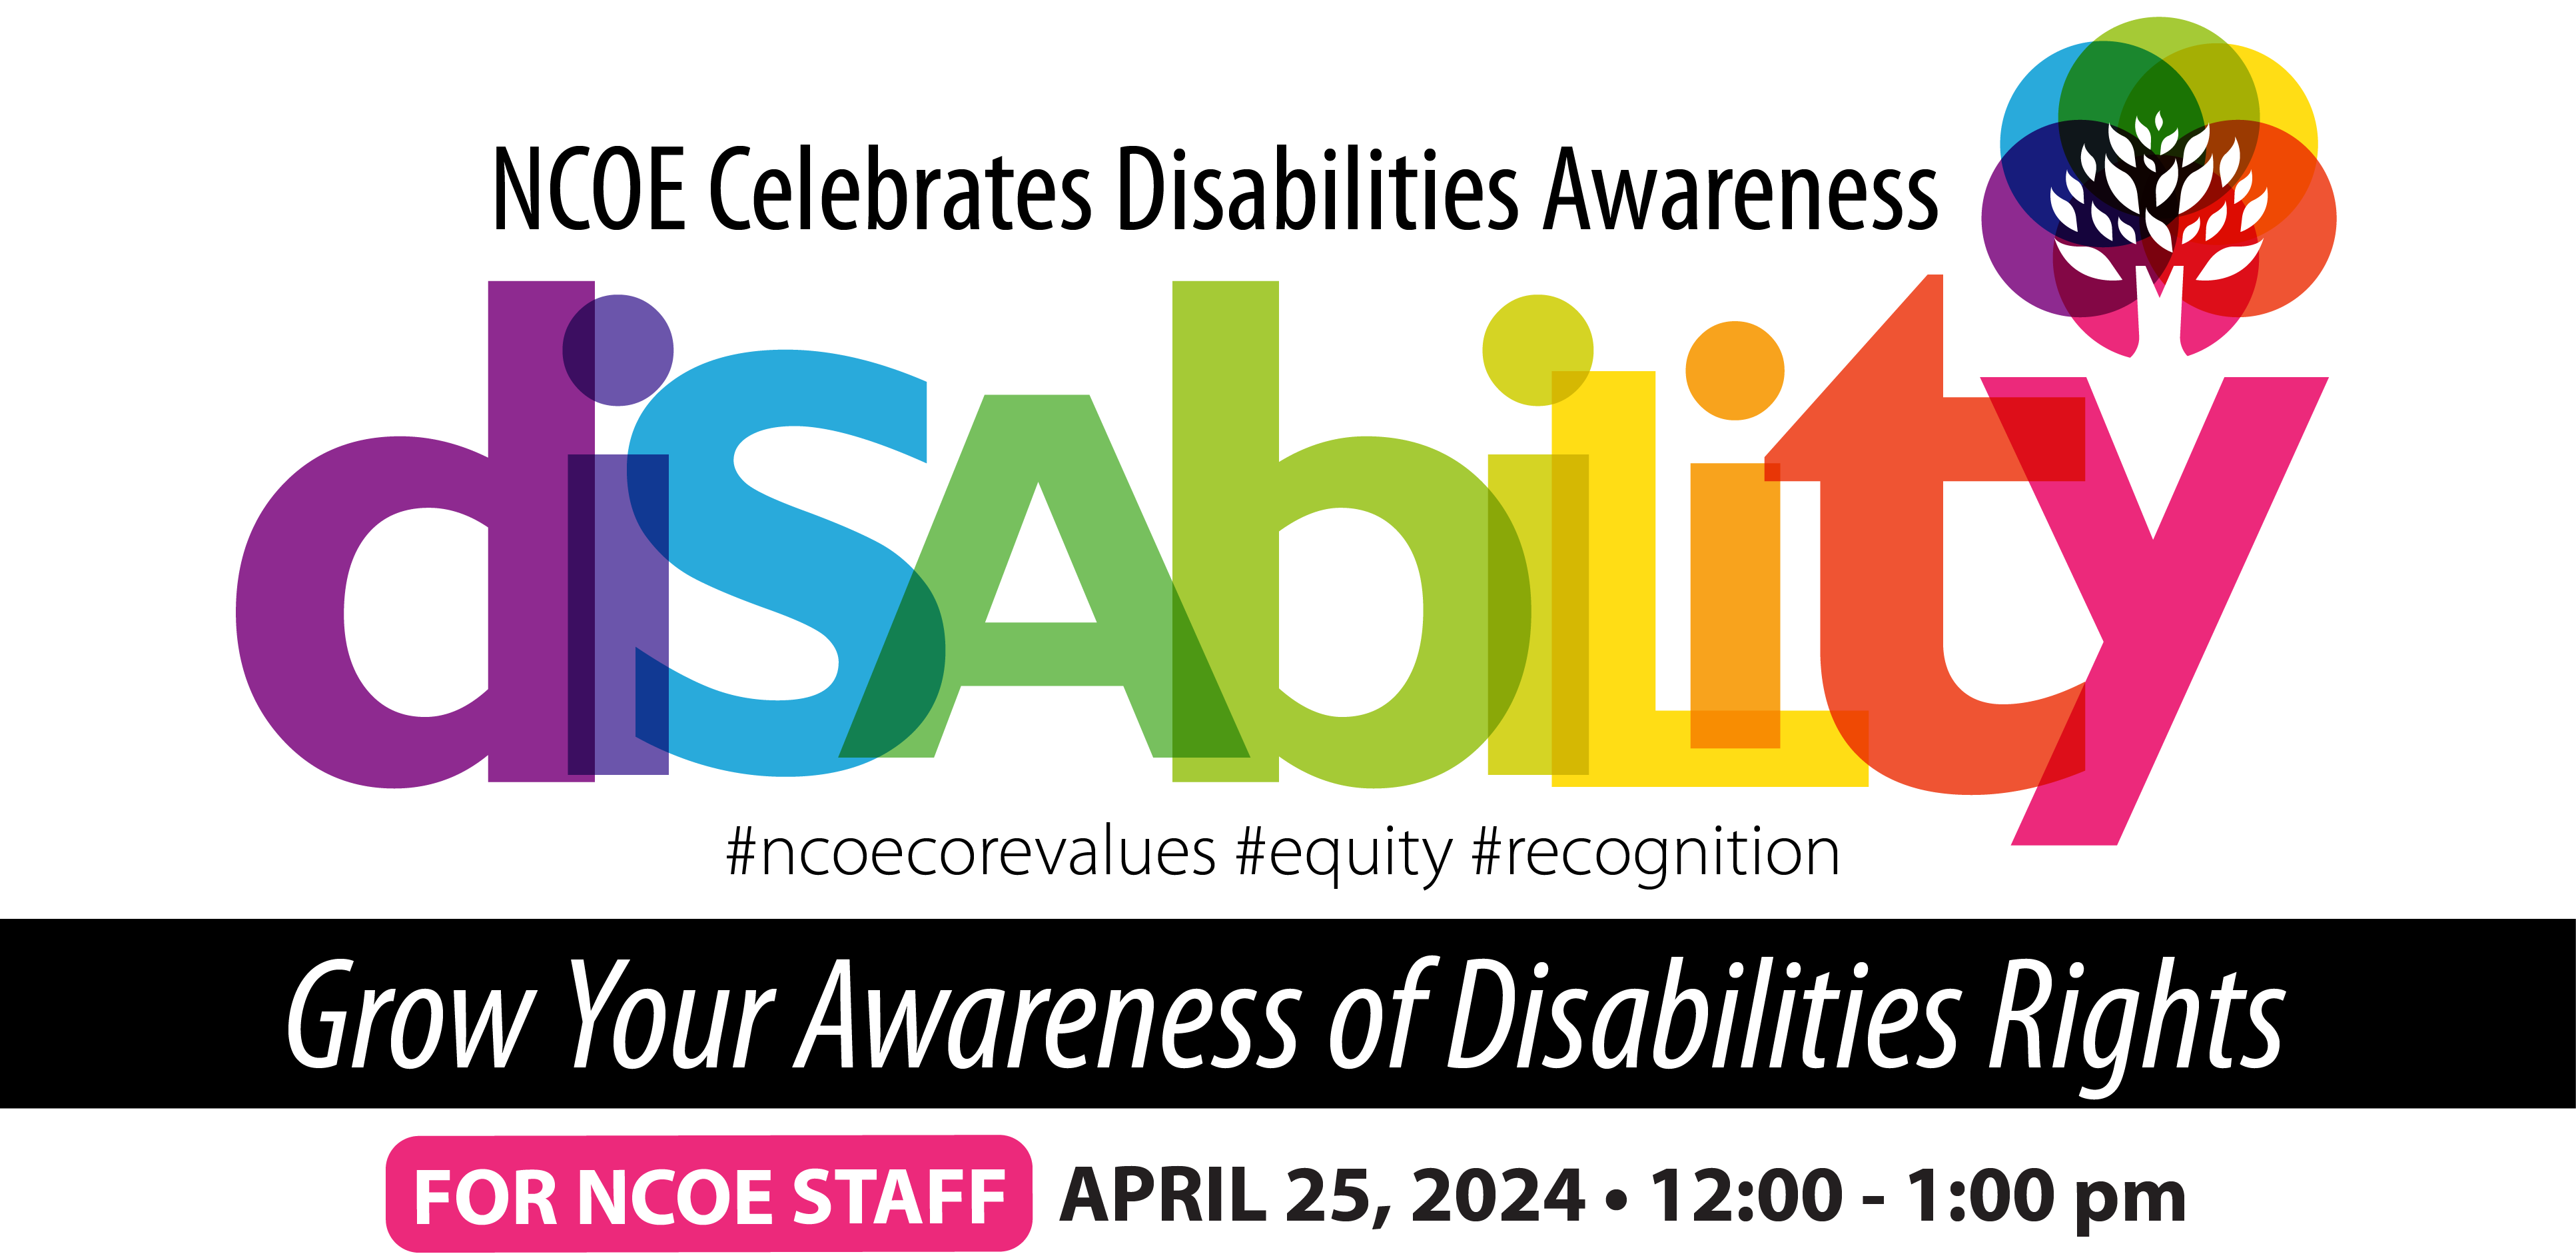 For NCOE Staff NCOE Disabilities Awareness Education Event - Grow Your Awareness about Disabilities Rights April 25, 2024 12:00 - 1:00 pm 